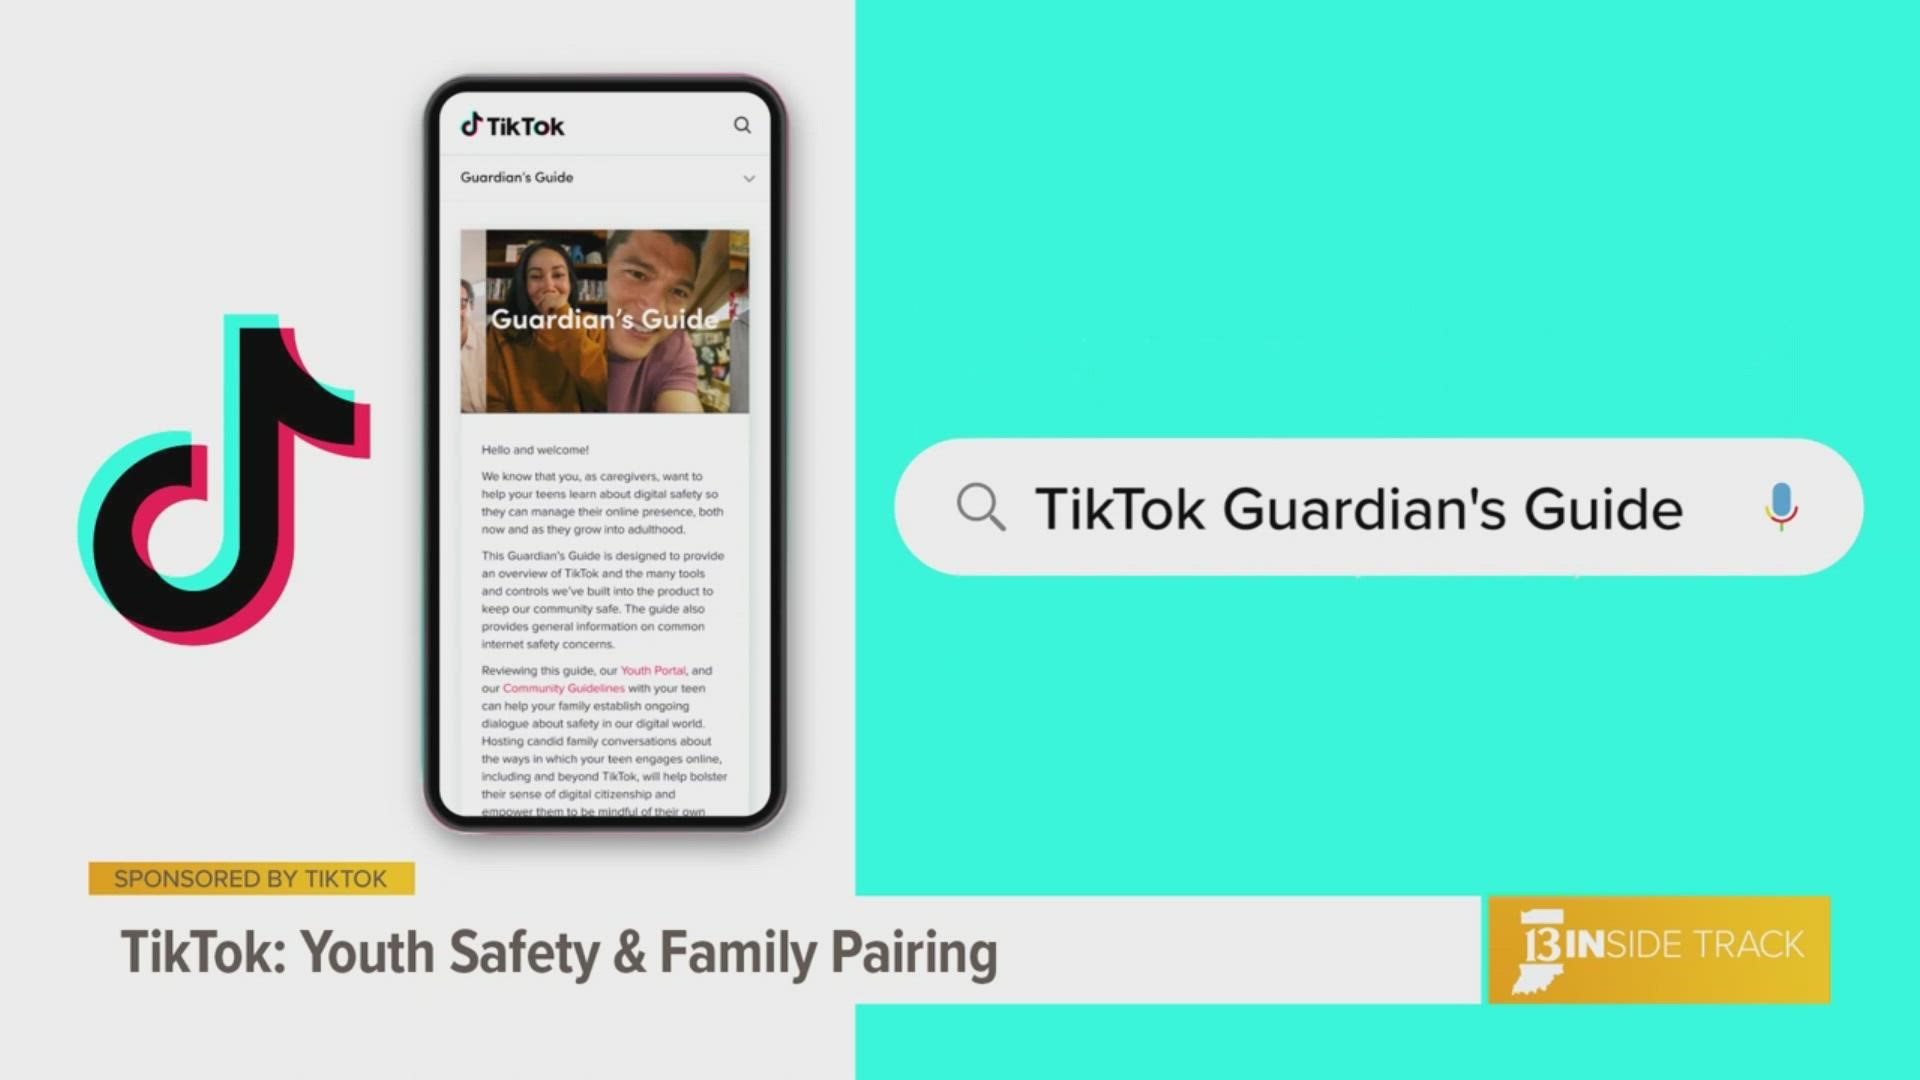 As more teens consume content on TikTok, many parents become increasingly concerned about safety. Learn about TikTok’s guardian features.